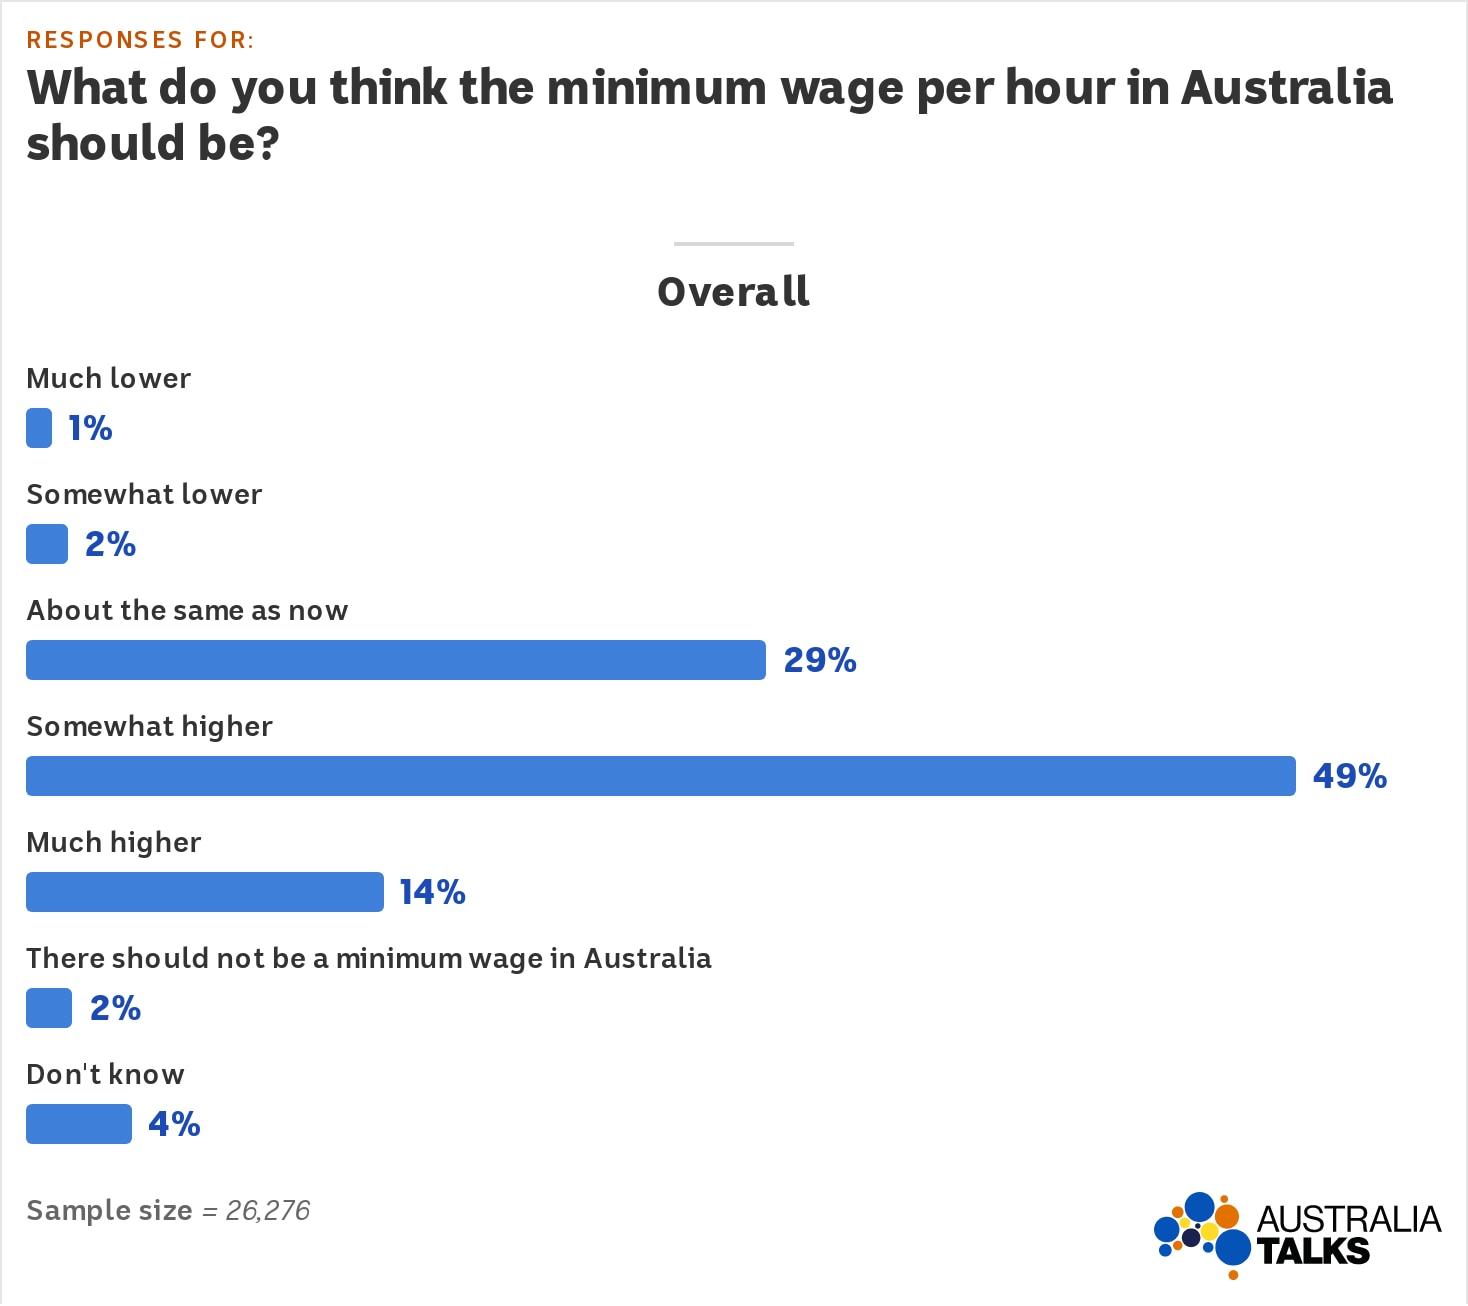 Want a pay rise? You should care about how much Australia's lowestpaid